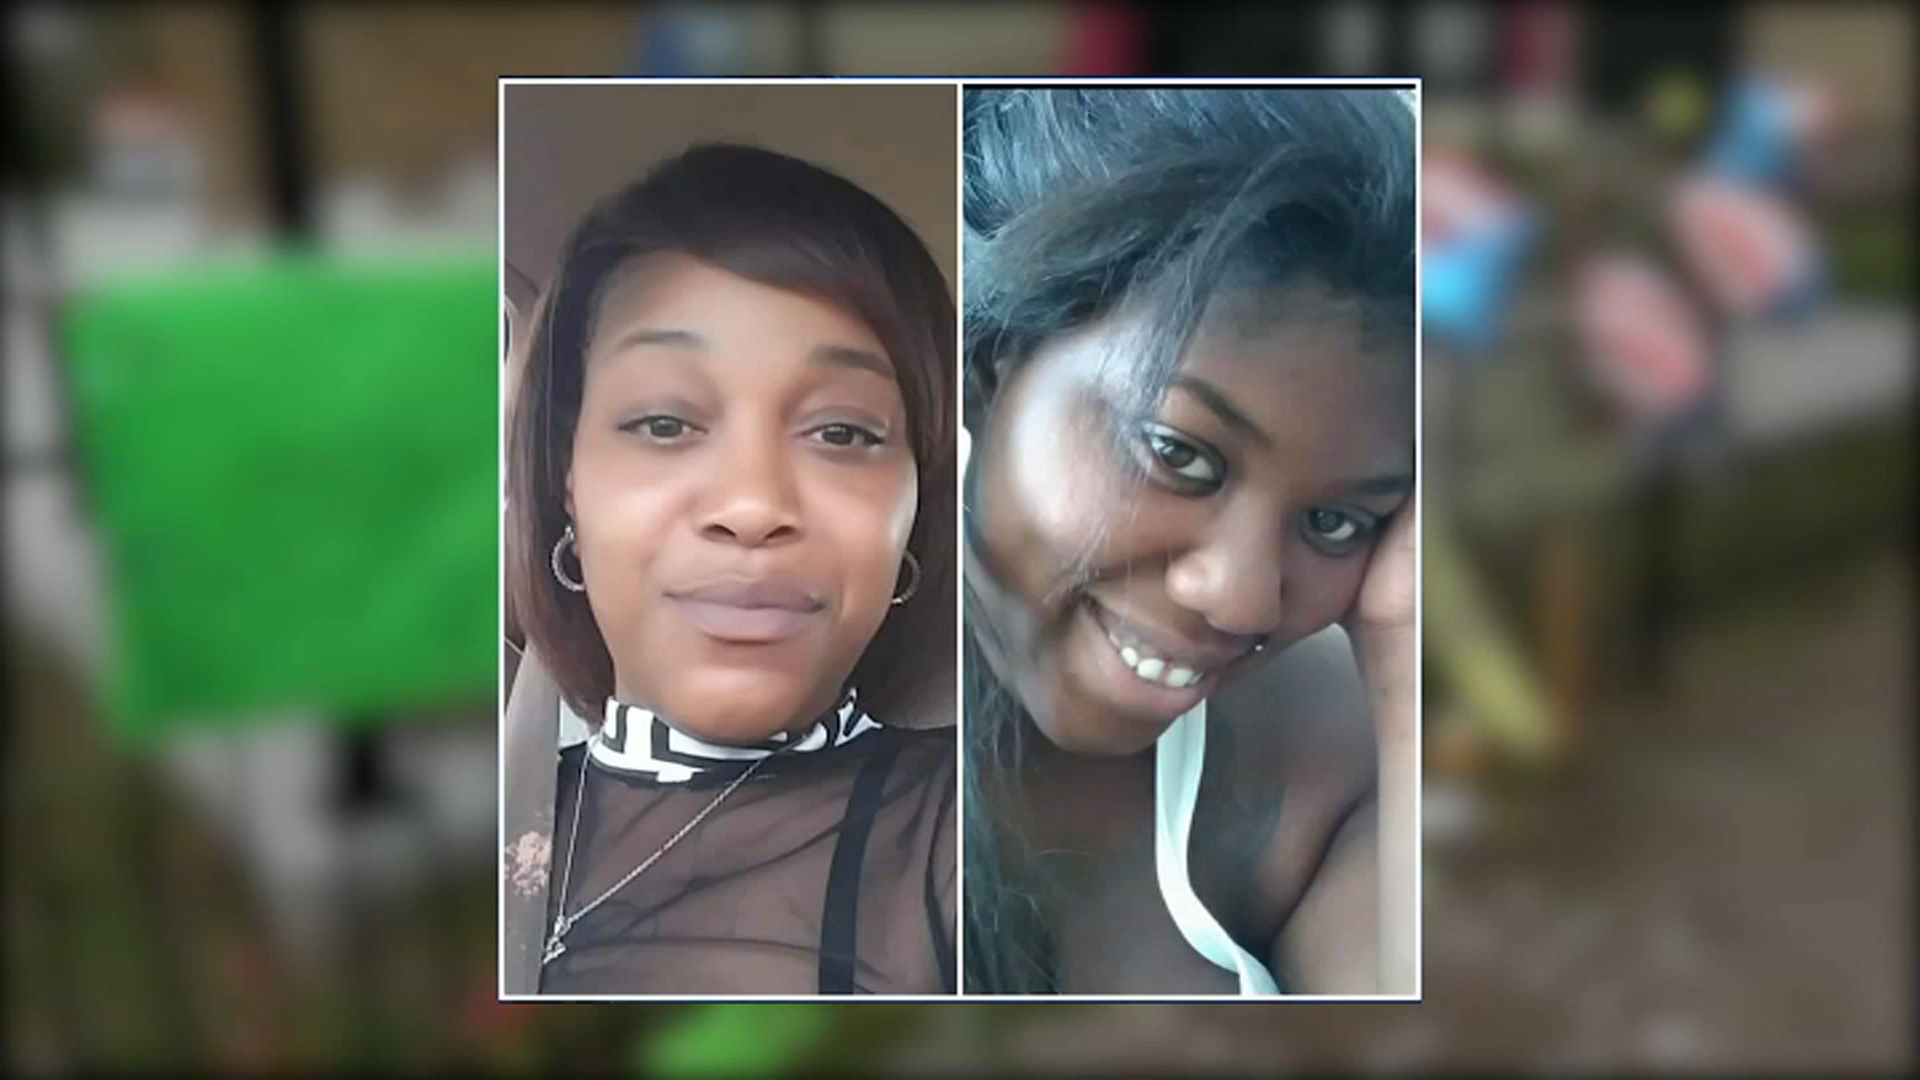 Andrea Stoudemire, 35, and Chantel Grant, 26, were killed in a drive-by shooting in July. The women were volunteering for Mothers Against Senseless Killings and trying to keep an Englewood block safe when they were killed.